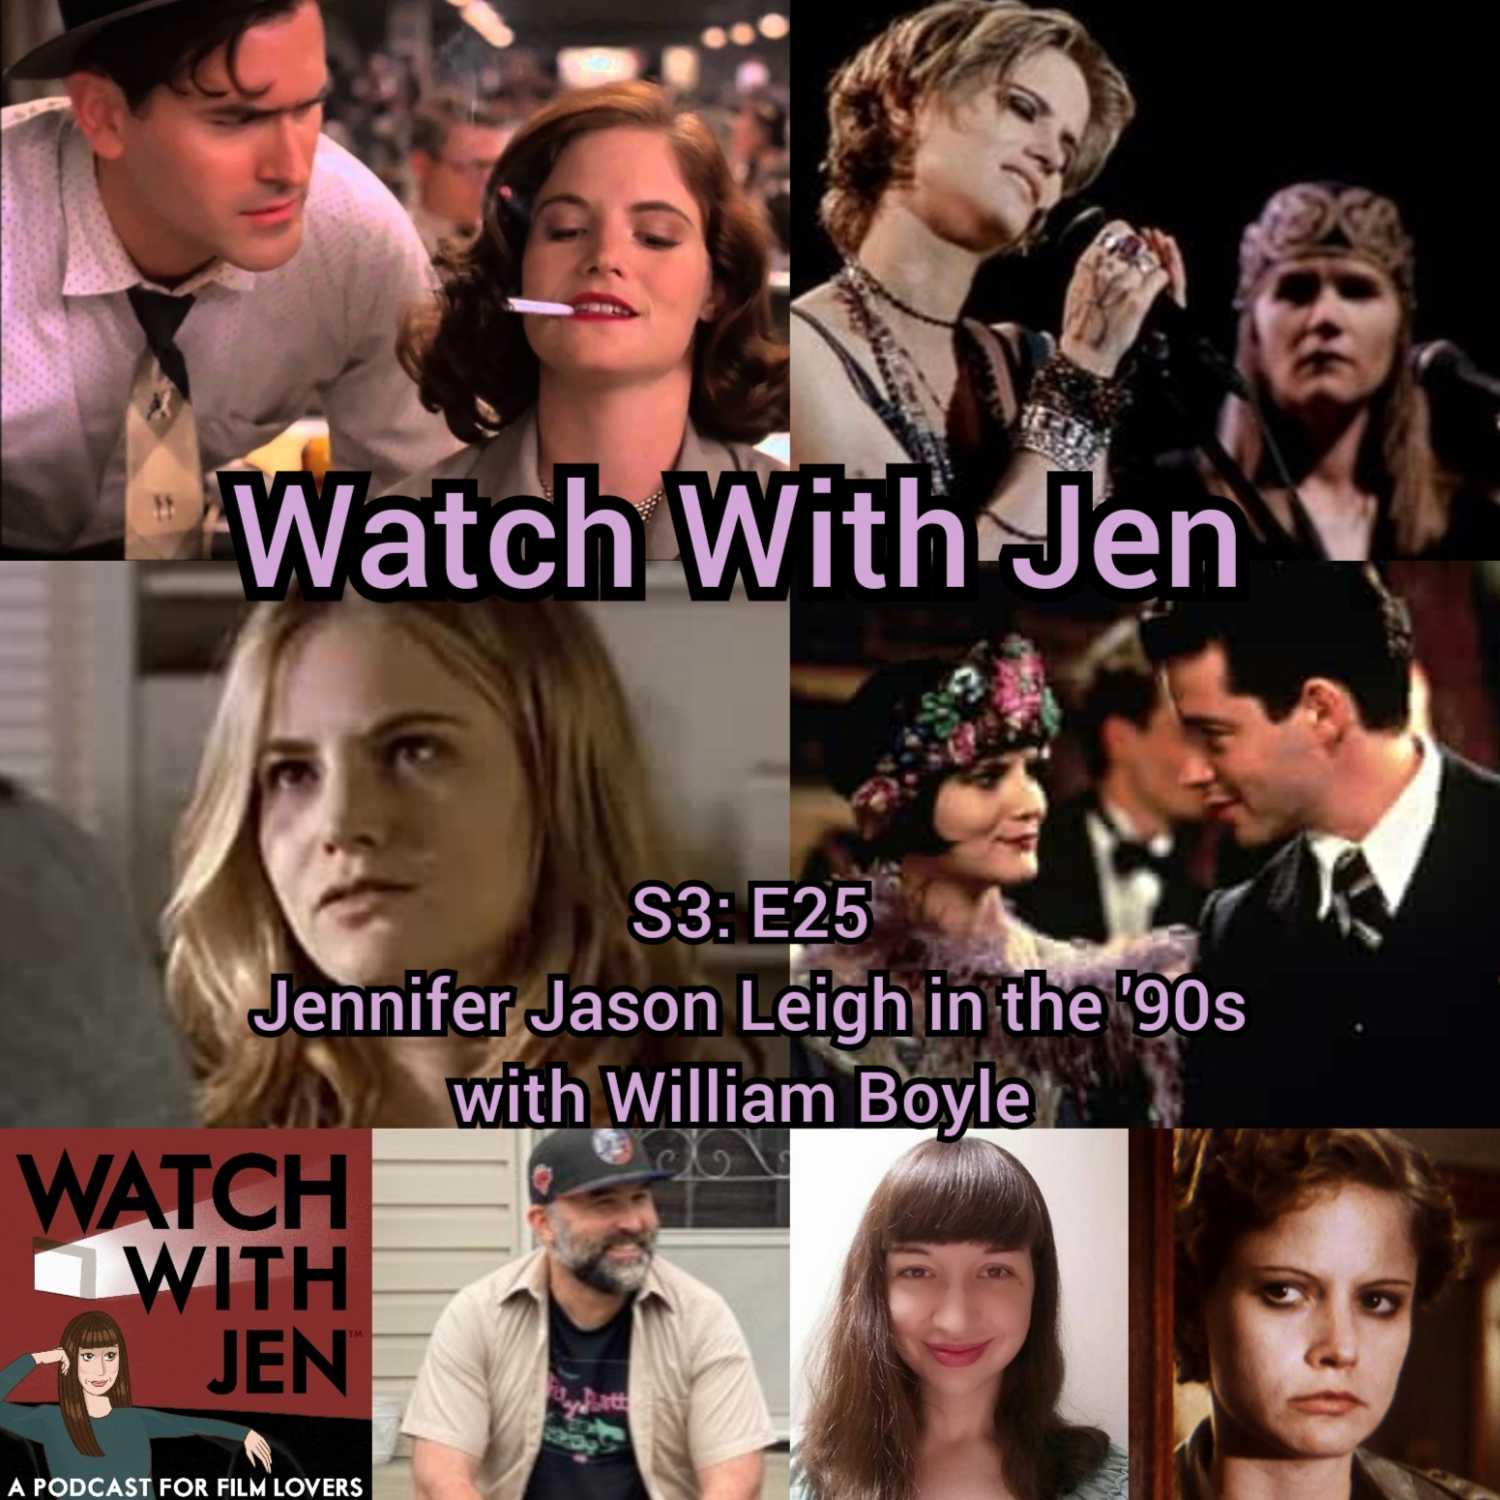 Watch With Jen - S3: E25 - Jennifer Jason Leigh in the '90s with William Boyle